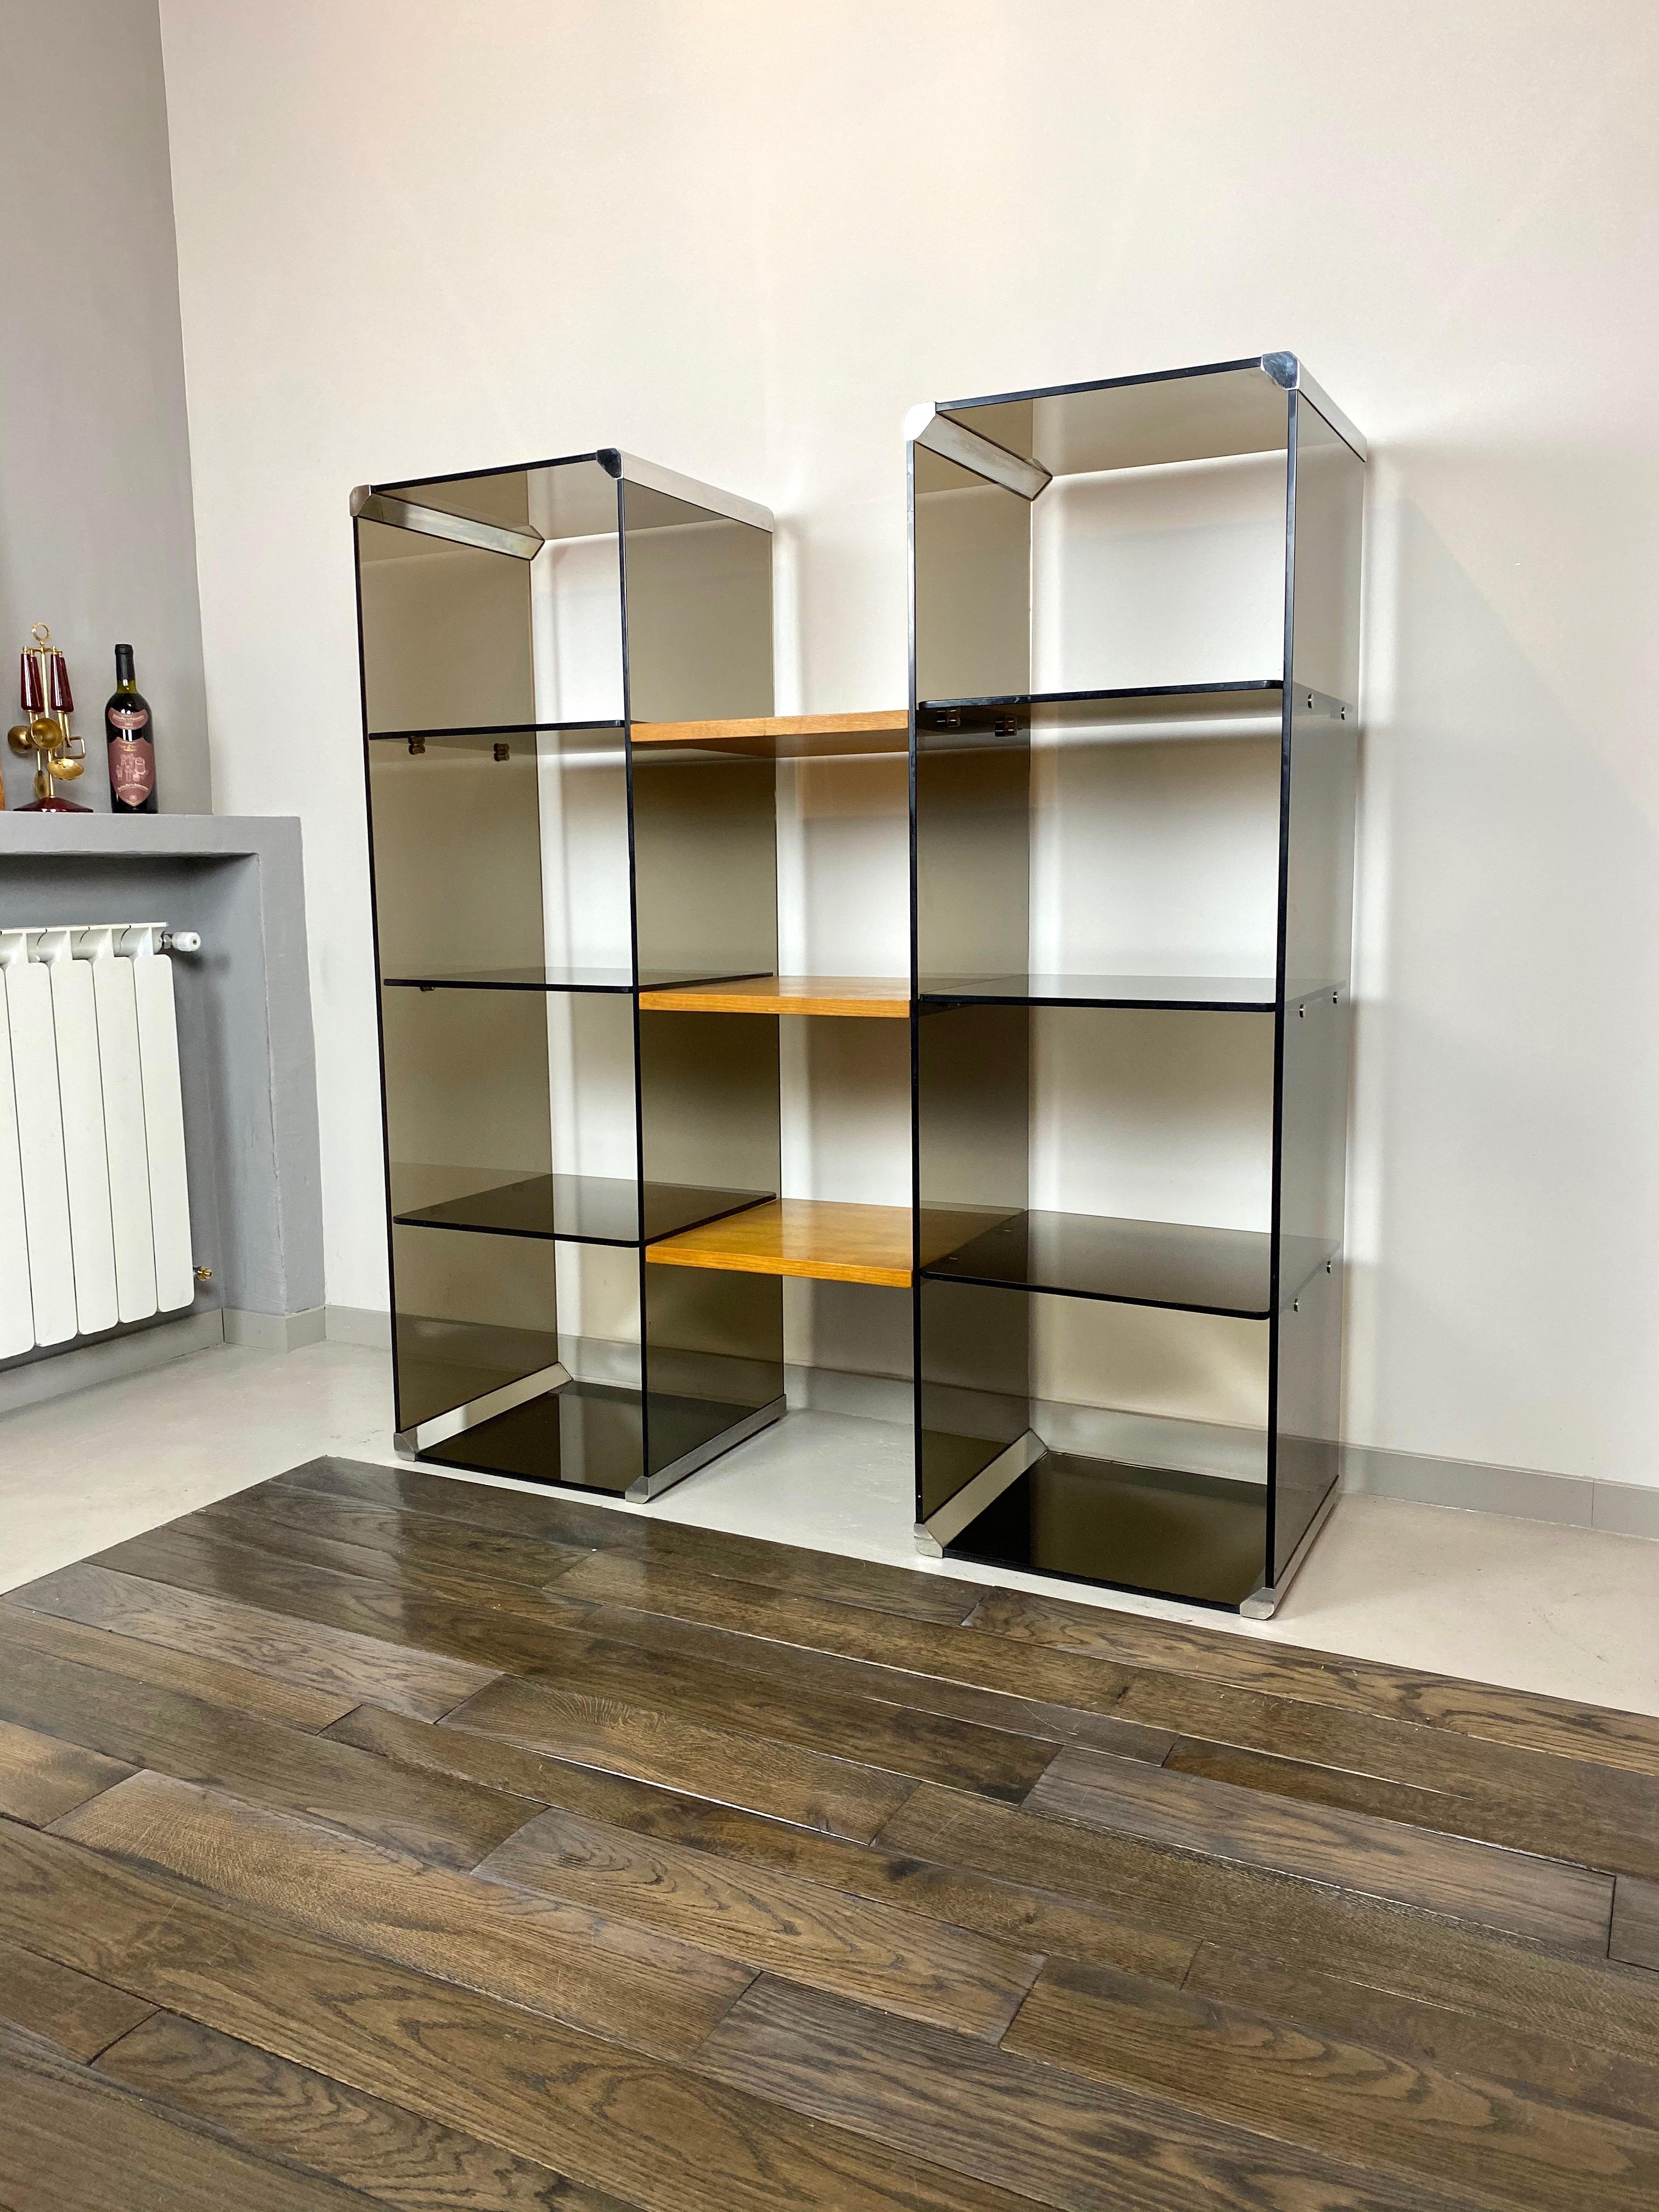 Bookshelf étagère cabinet by Gallotti & Radice, featuring chrome borders and two smoked glass columns with shelves linked together by wooden shelves. Italy, circa 1970.
The bottom shelves are mirrors, which, as the photos show, present some sign of